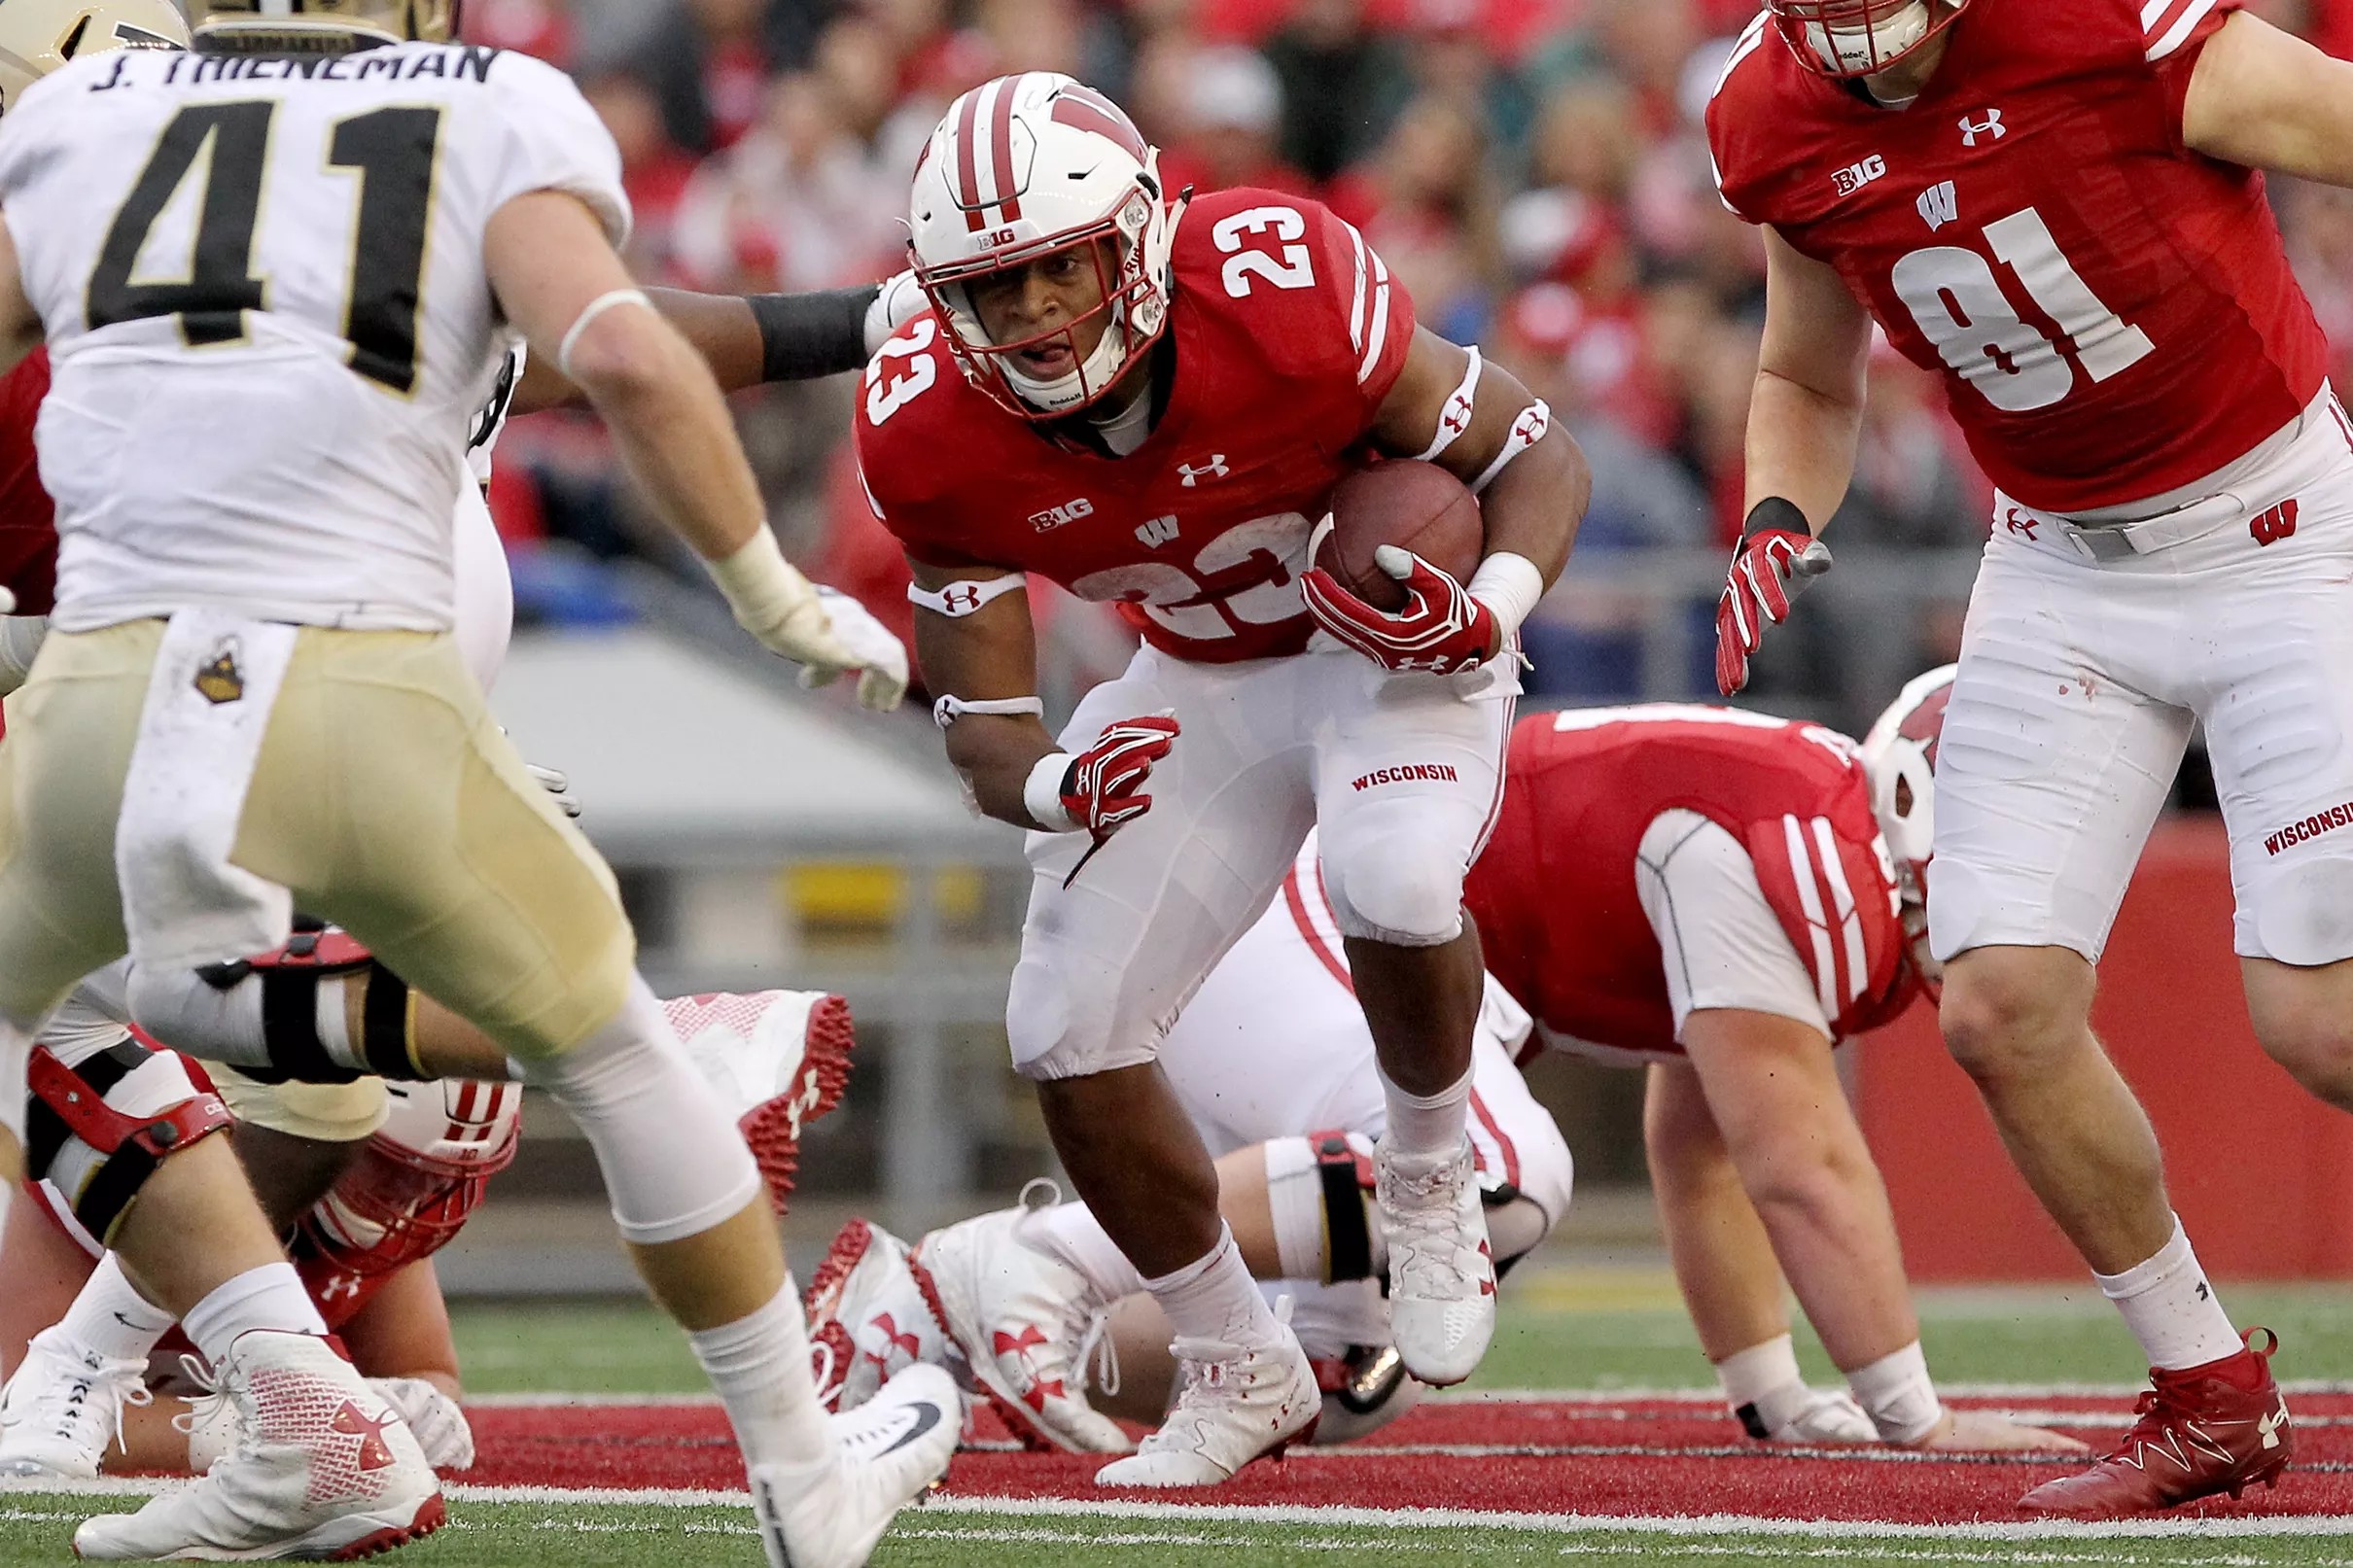 Wisconsin vs. Purdue betting preview